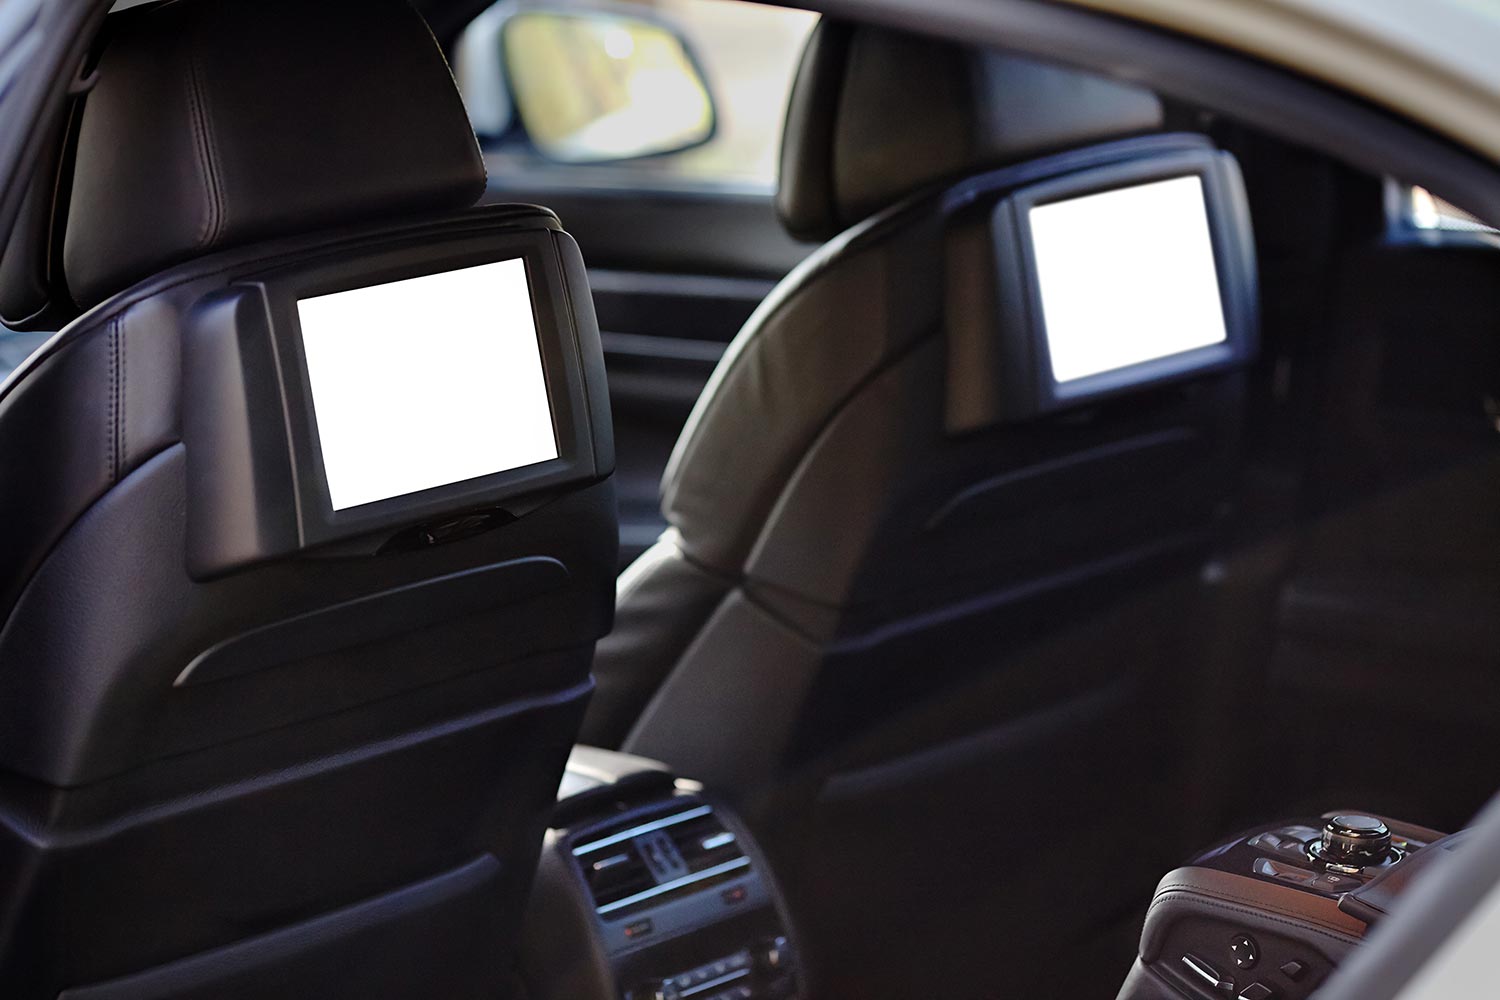 Two white displays for back seats passenger with media control panel